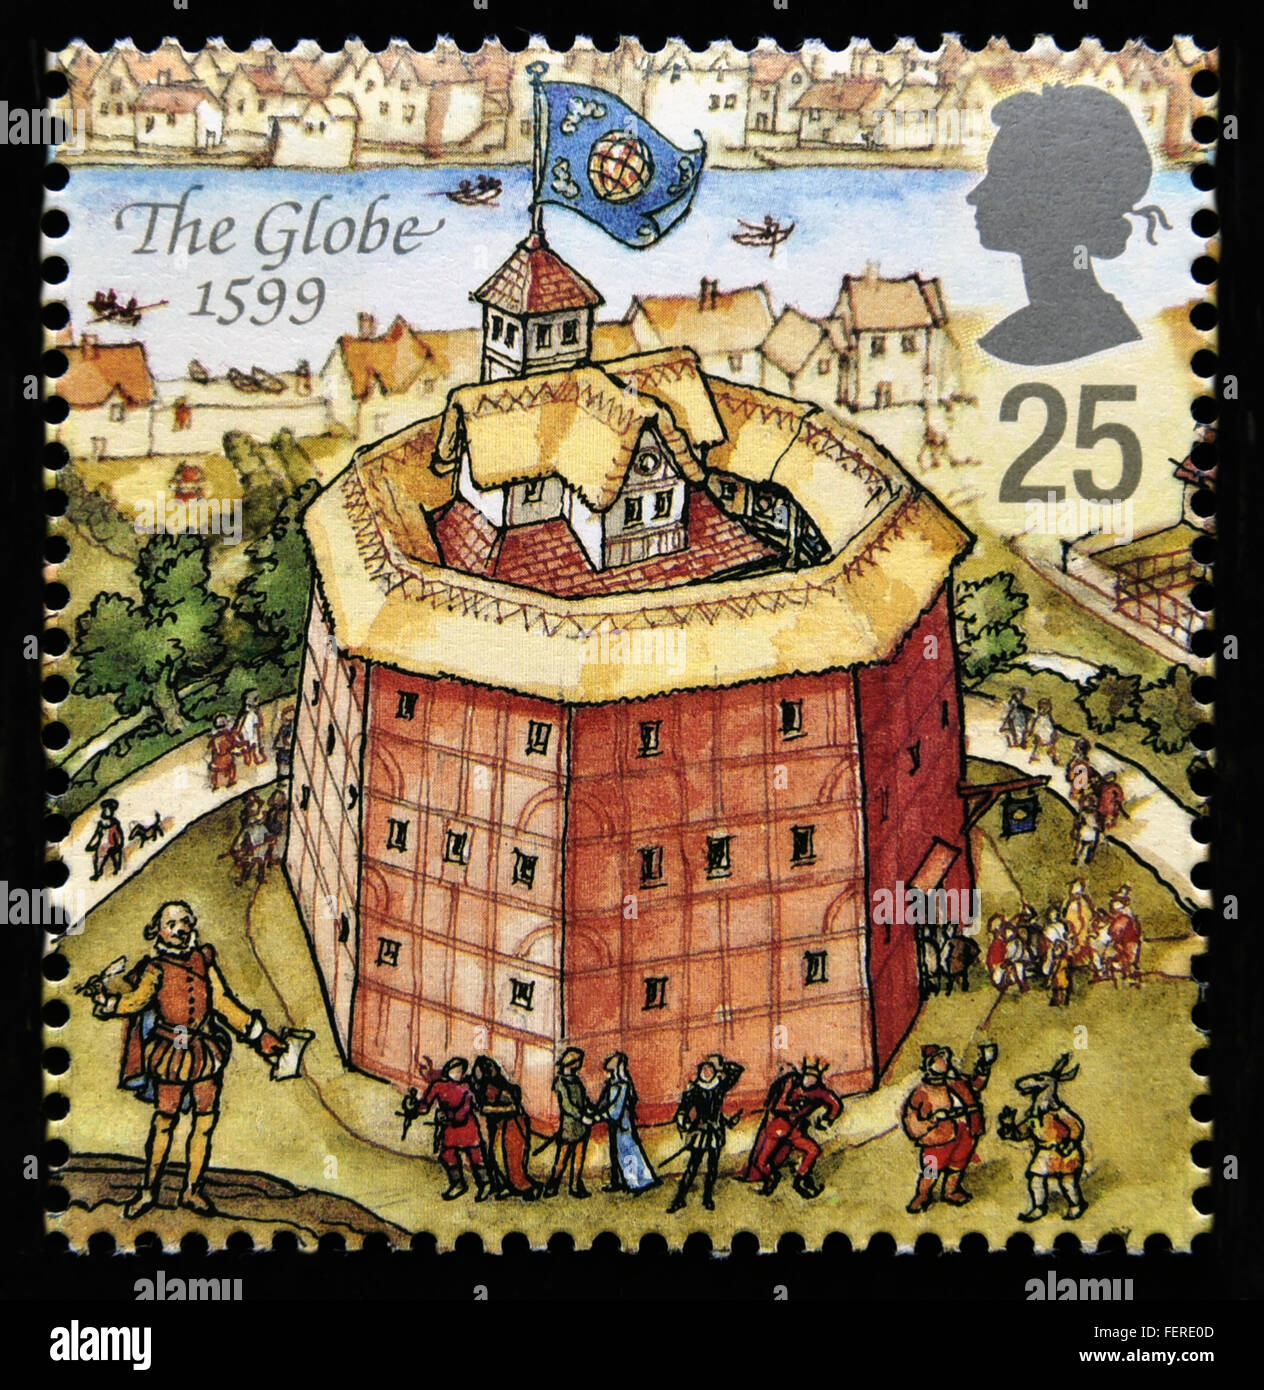 Postage stamp. Great Britain. Queen Elizabeth II. 1995. Reconstruction of Shakespeare's Globe Theatre. The Globe 1599. Stock Photo